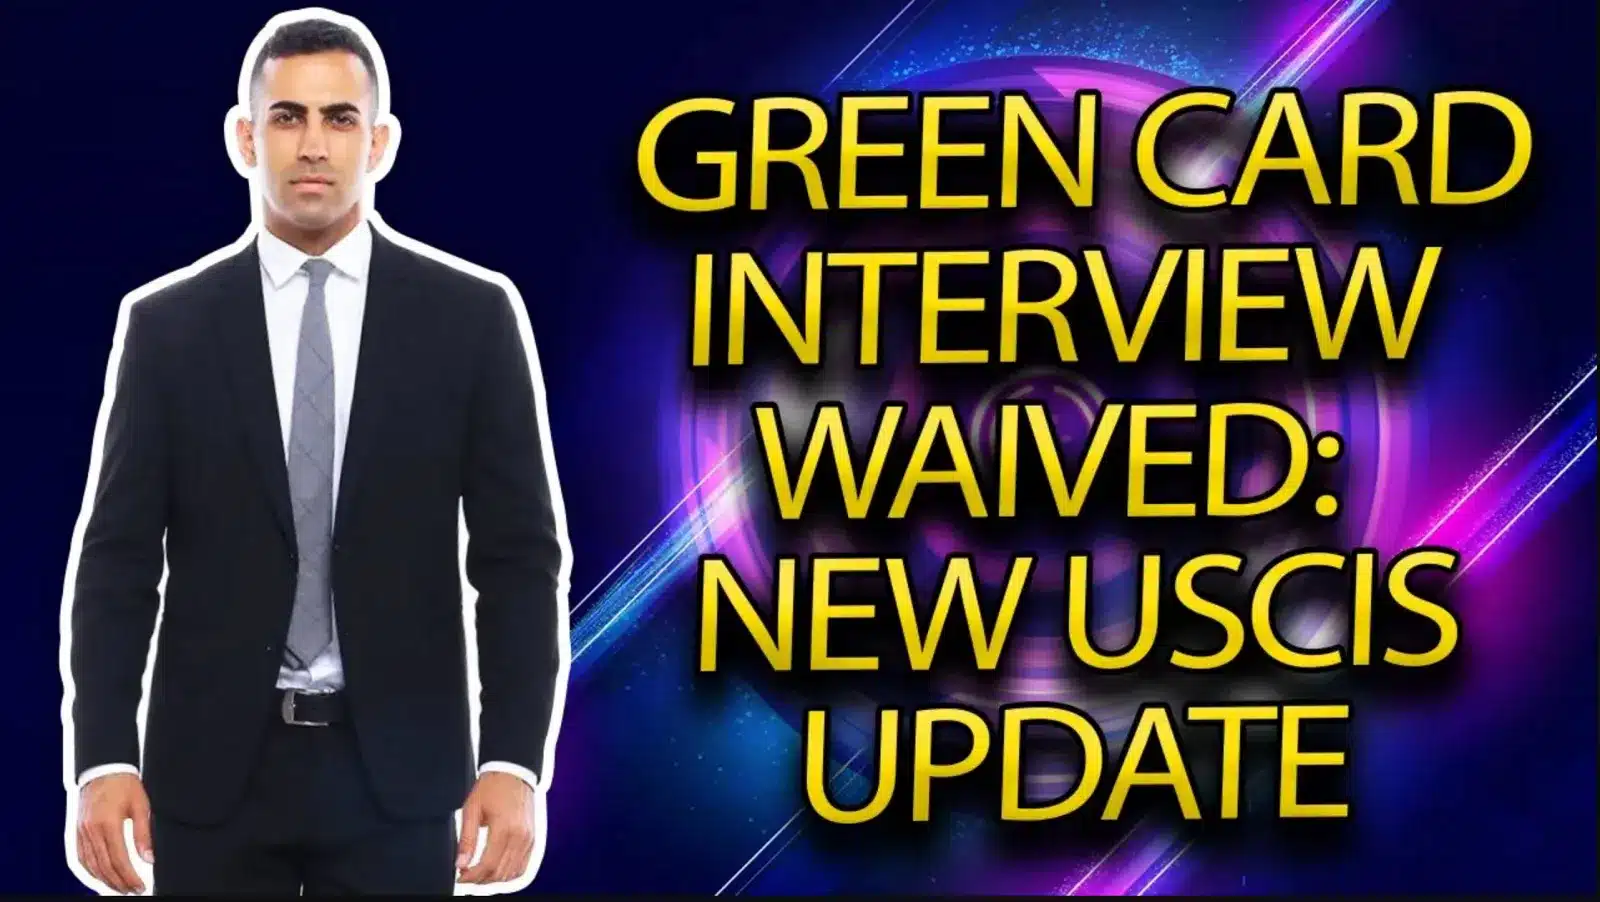 Green Card Interview Waived - New USCIS Update